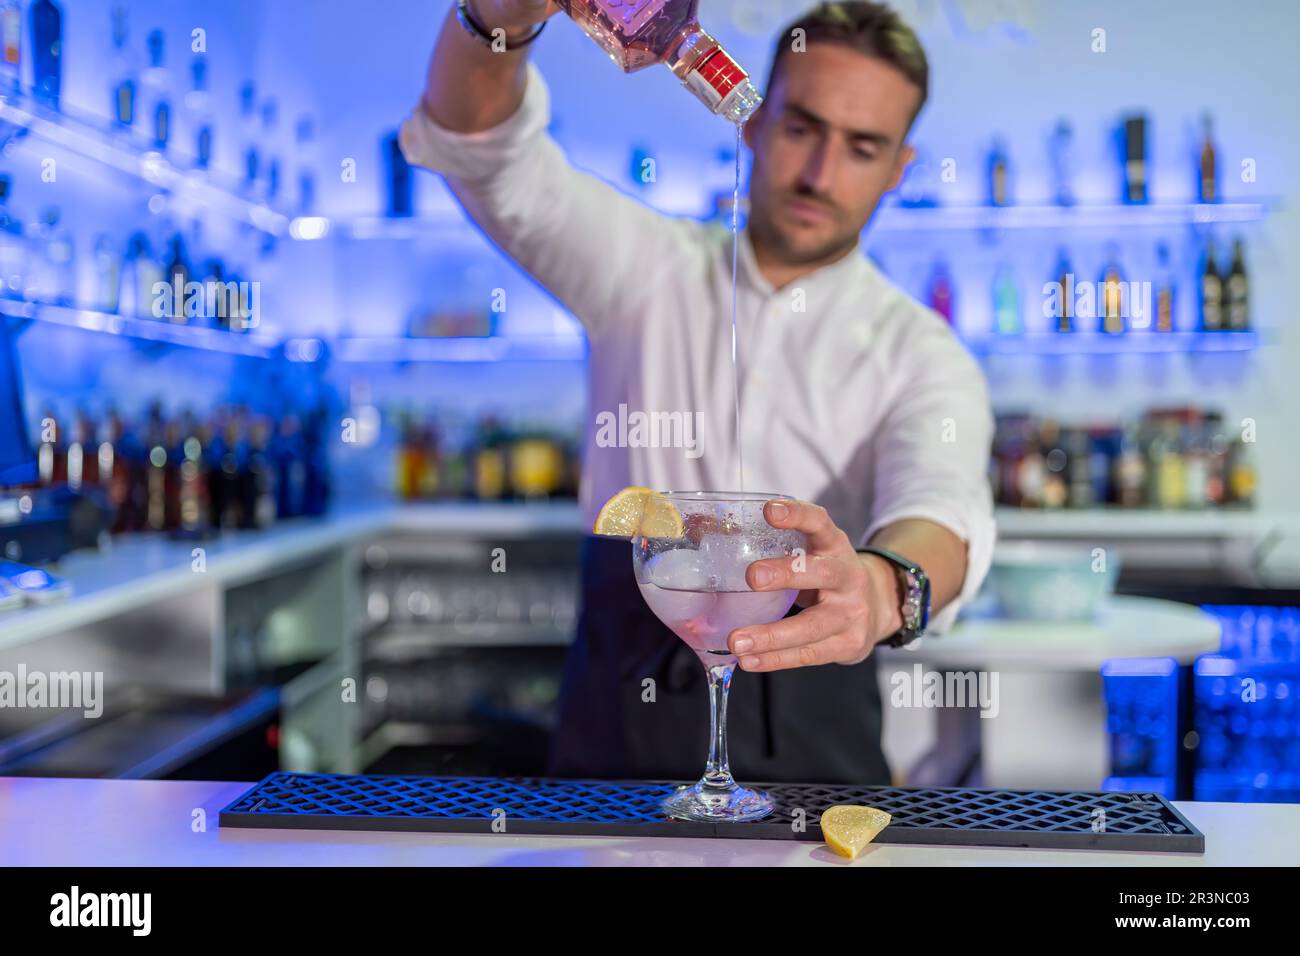 Focused young male barkeeper pouring alcohol drink from bottle into glass of cocktail with orange slice on counter while looking down against blurred Stock Photo